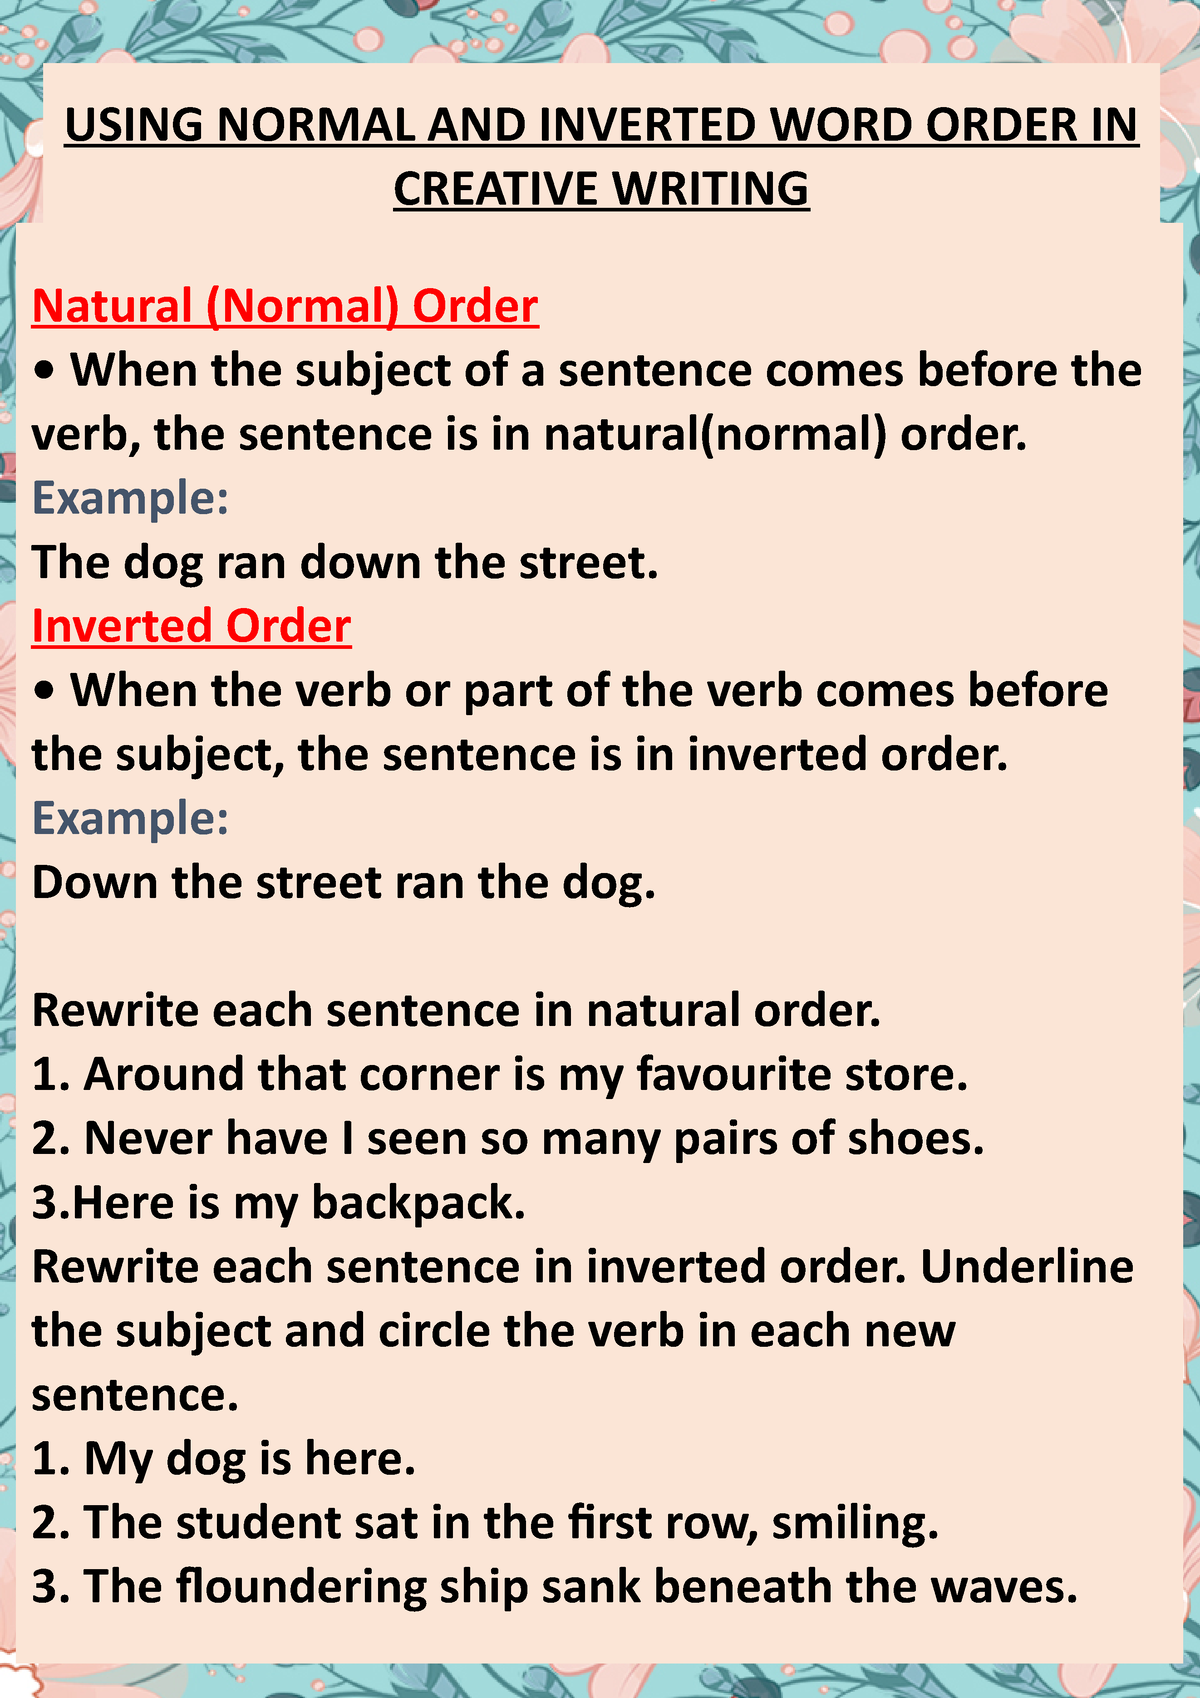 Inverted Normal Word Order Grade 9 Visuals USING NORMAL AND INVERTED 